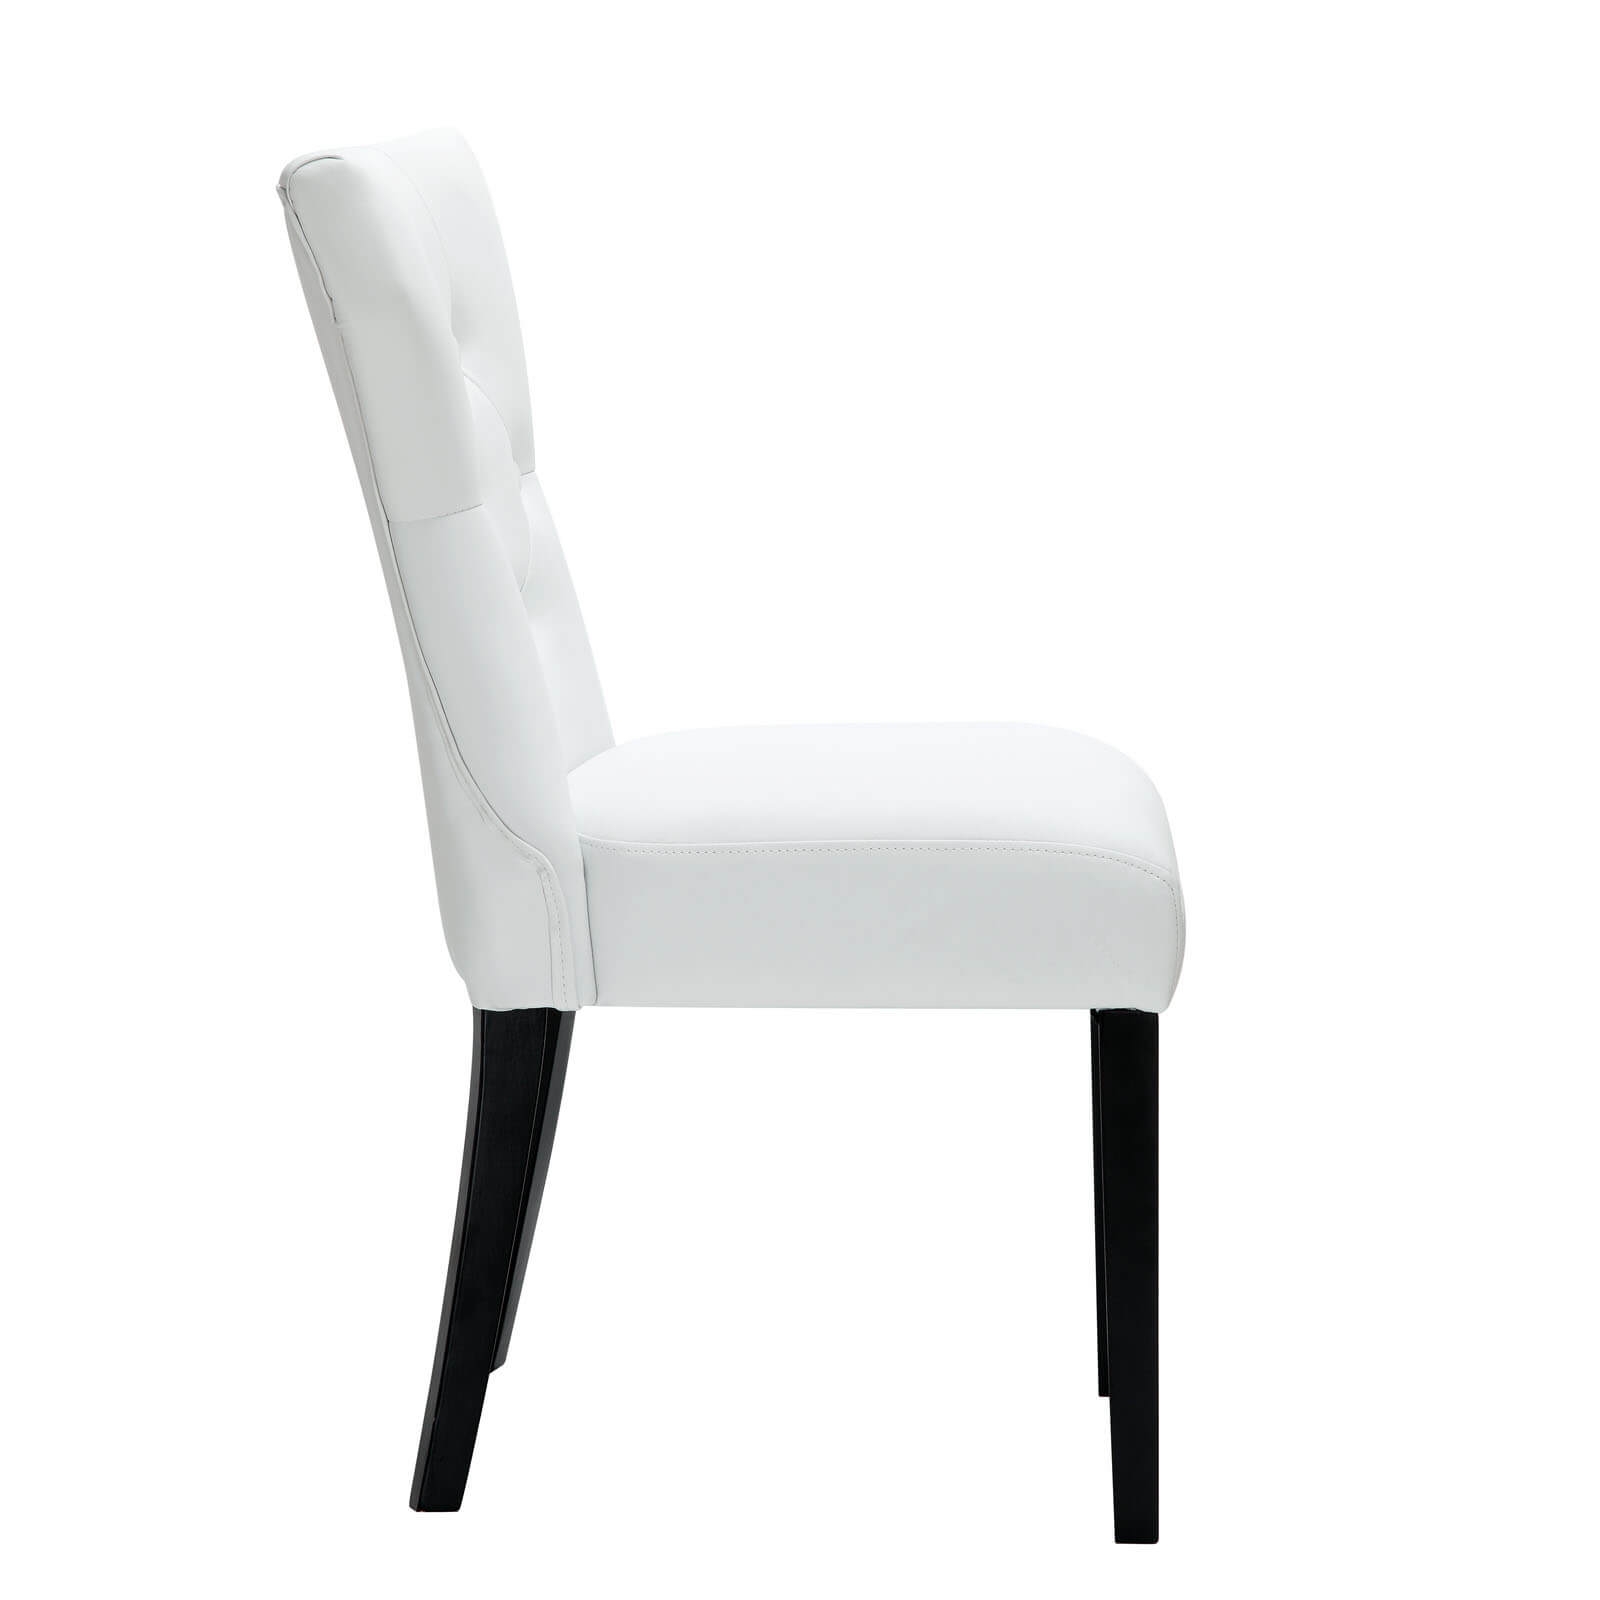 Dining upholstered chair side view